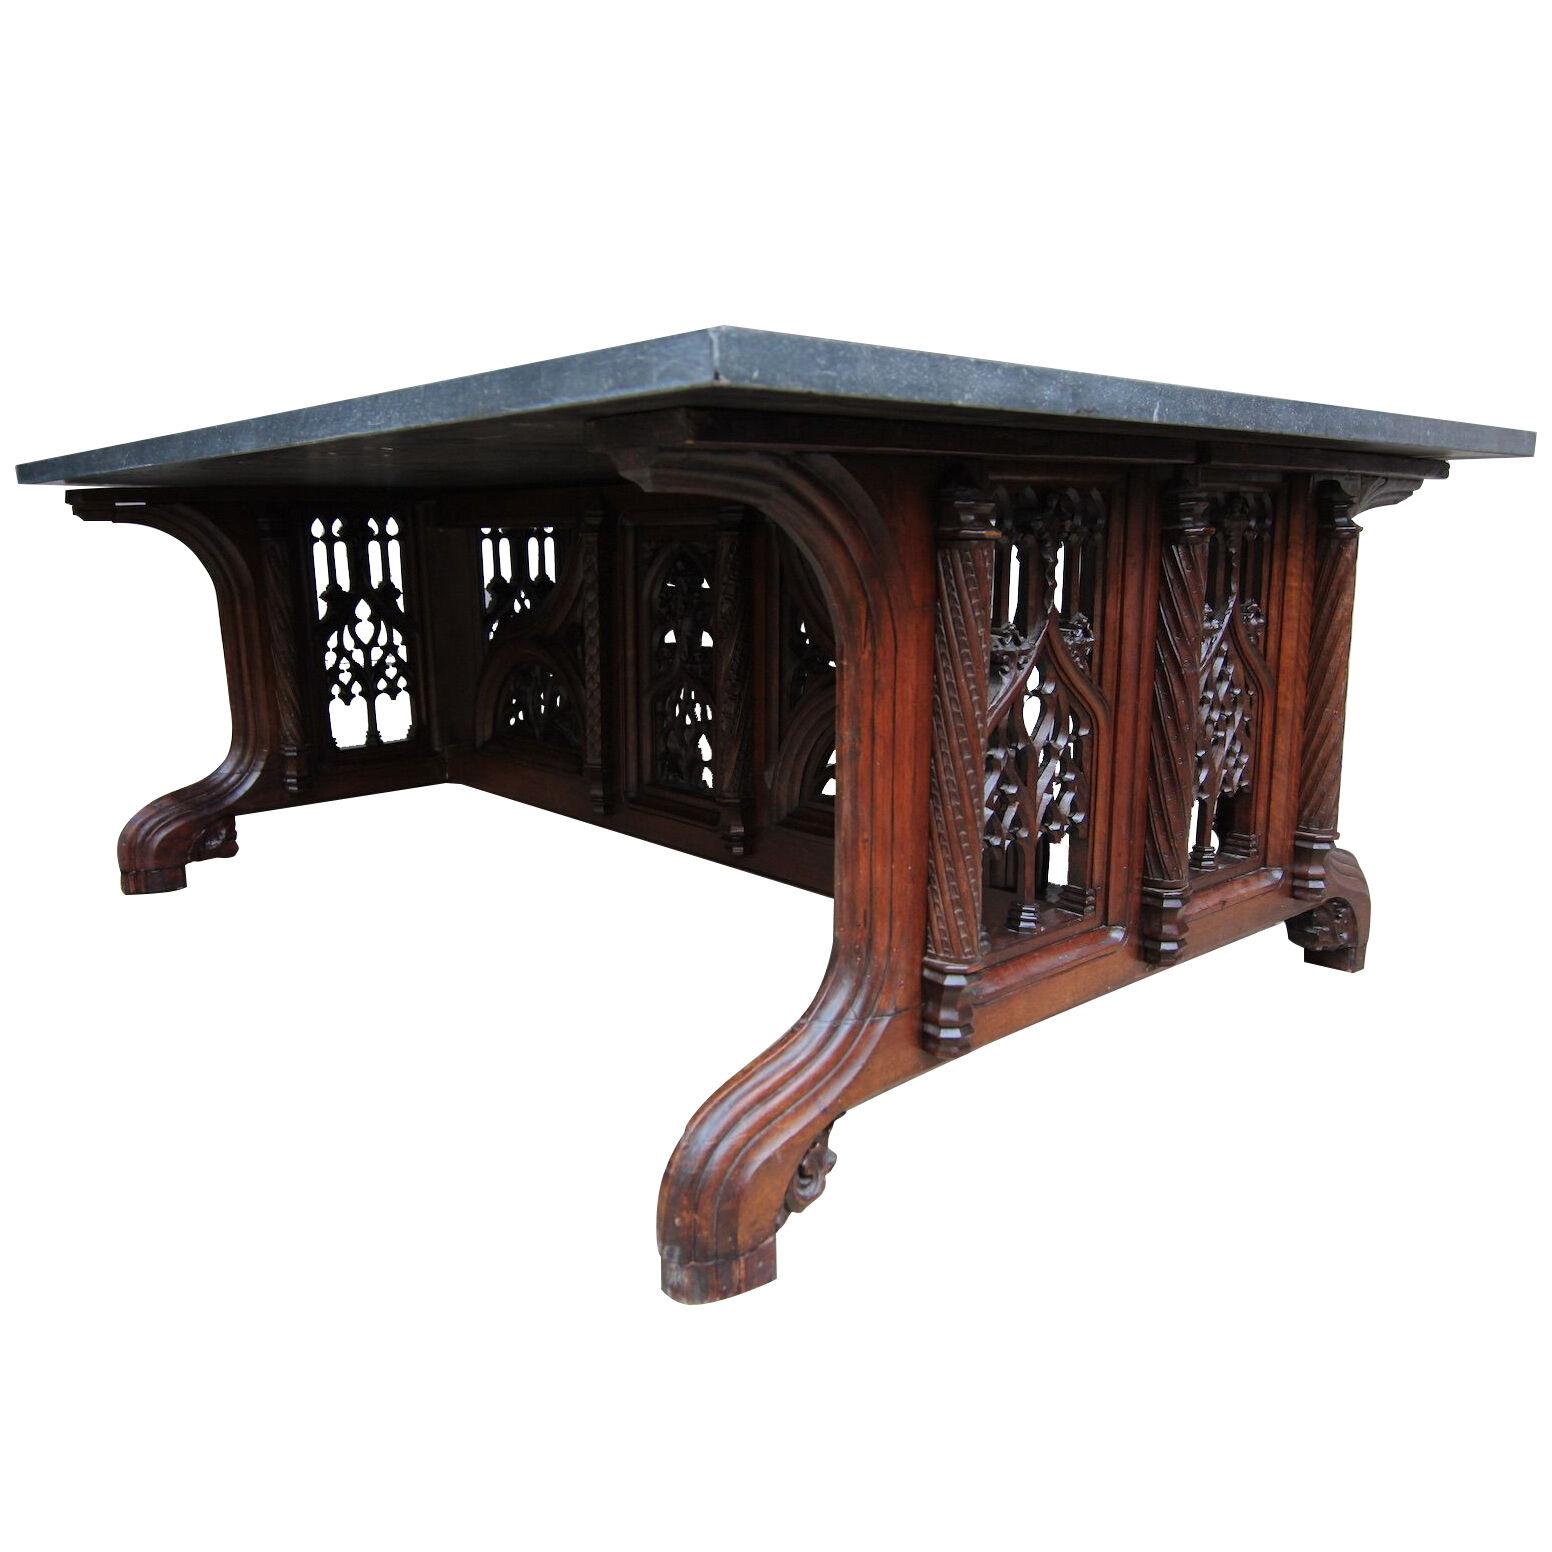 19th Century Gothic Revival Center Table with Granite Top